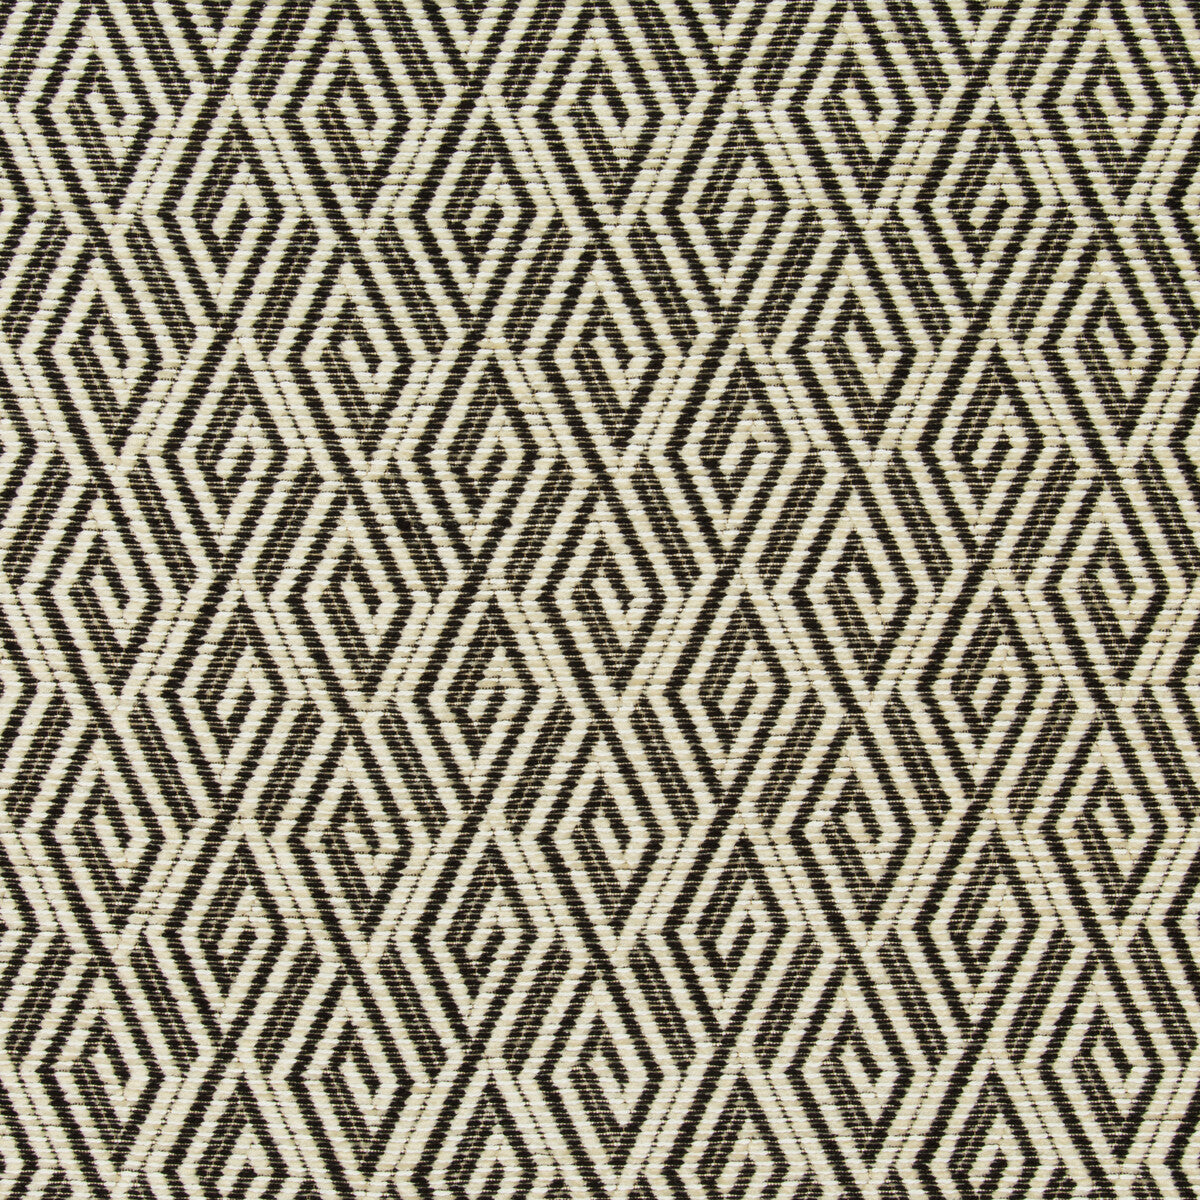 Kravet Design fabric in 34972-8 color - pattern 34972.8.0 - by Kravet Design in the Performance Crypton Home collection